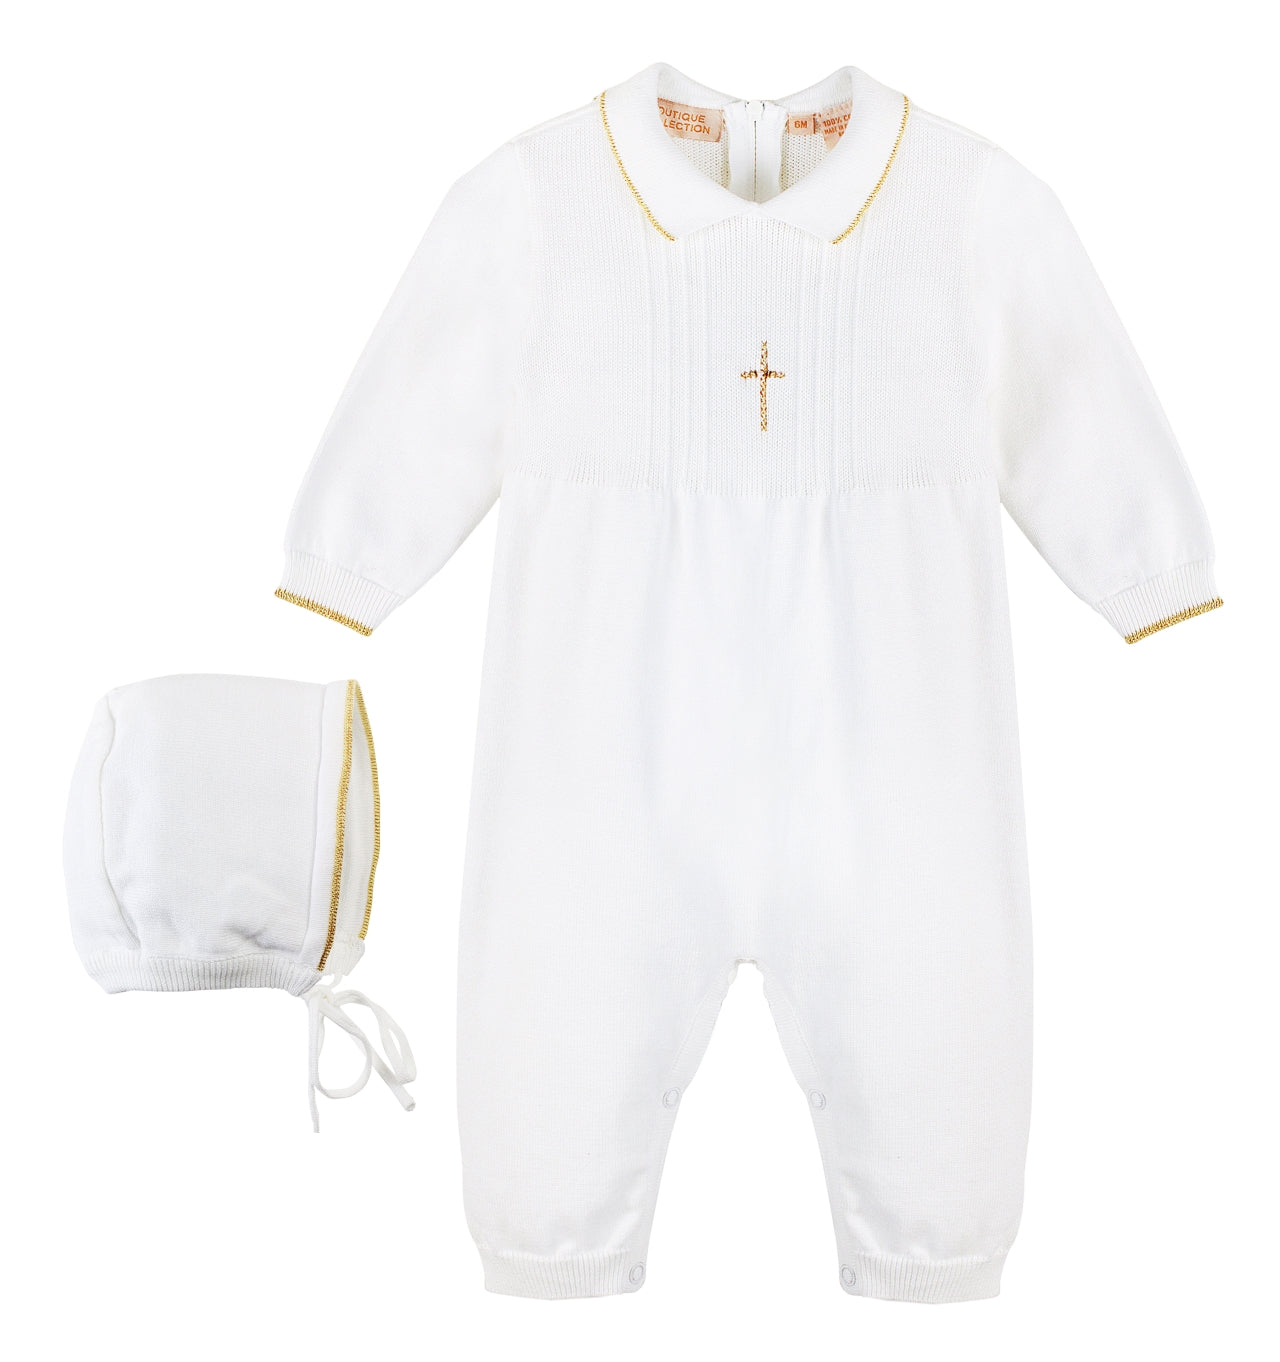 Knit Pearl Gold Cross Baby Boy Christening Outfit with Bonnet - Imagewear